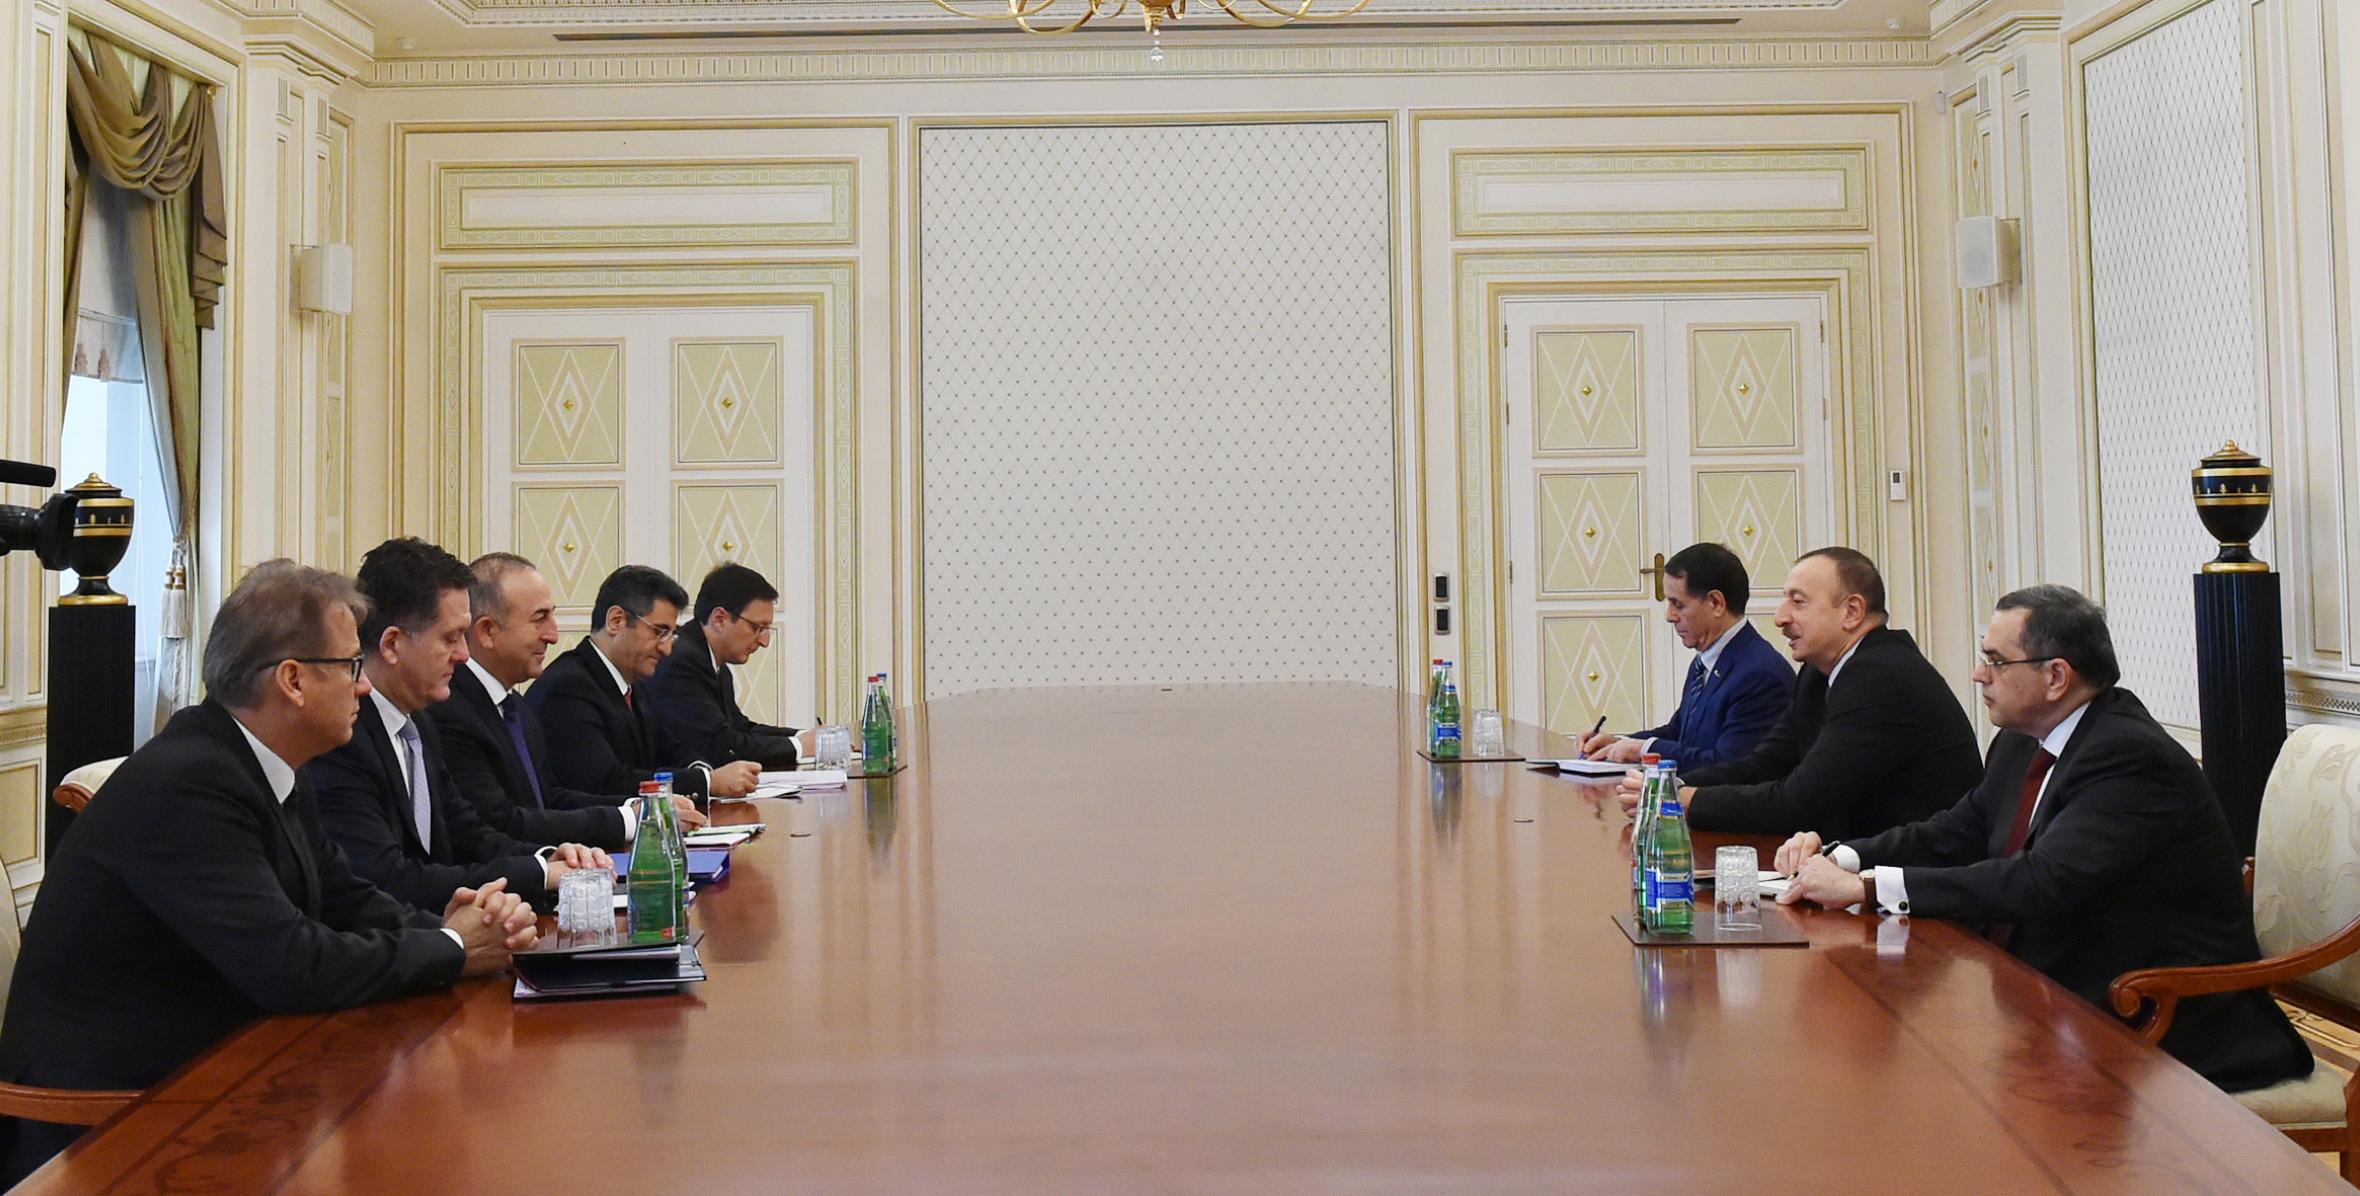 Ilham Aliyev received a delegation led by the Turkish Foreign Affairs Minister